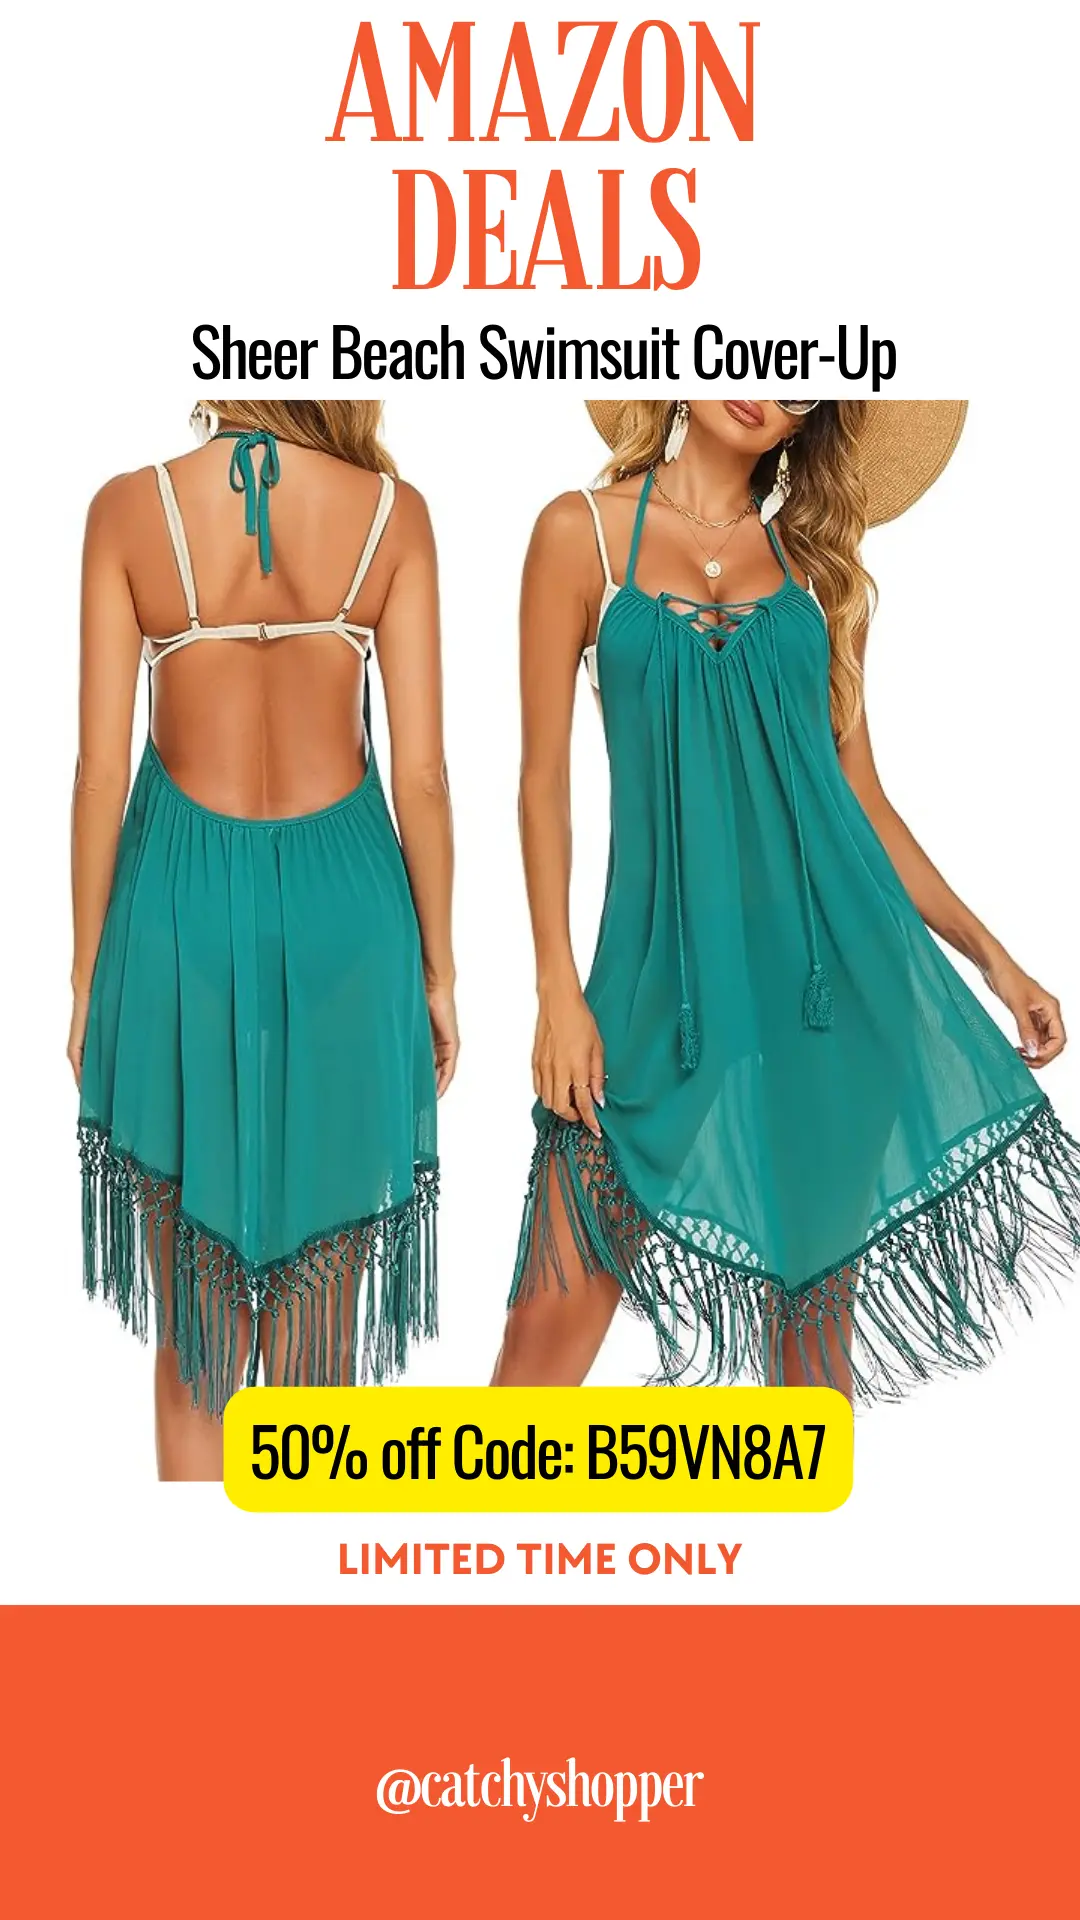 Sheer Beach Swimsuit Cover-Up